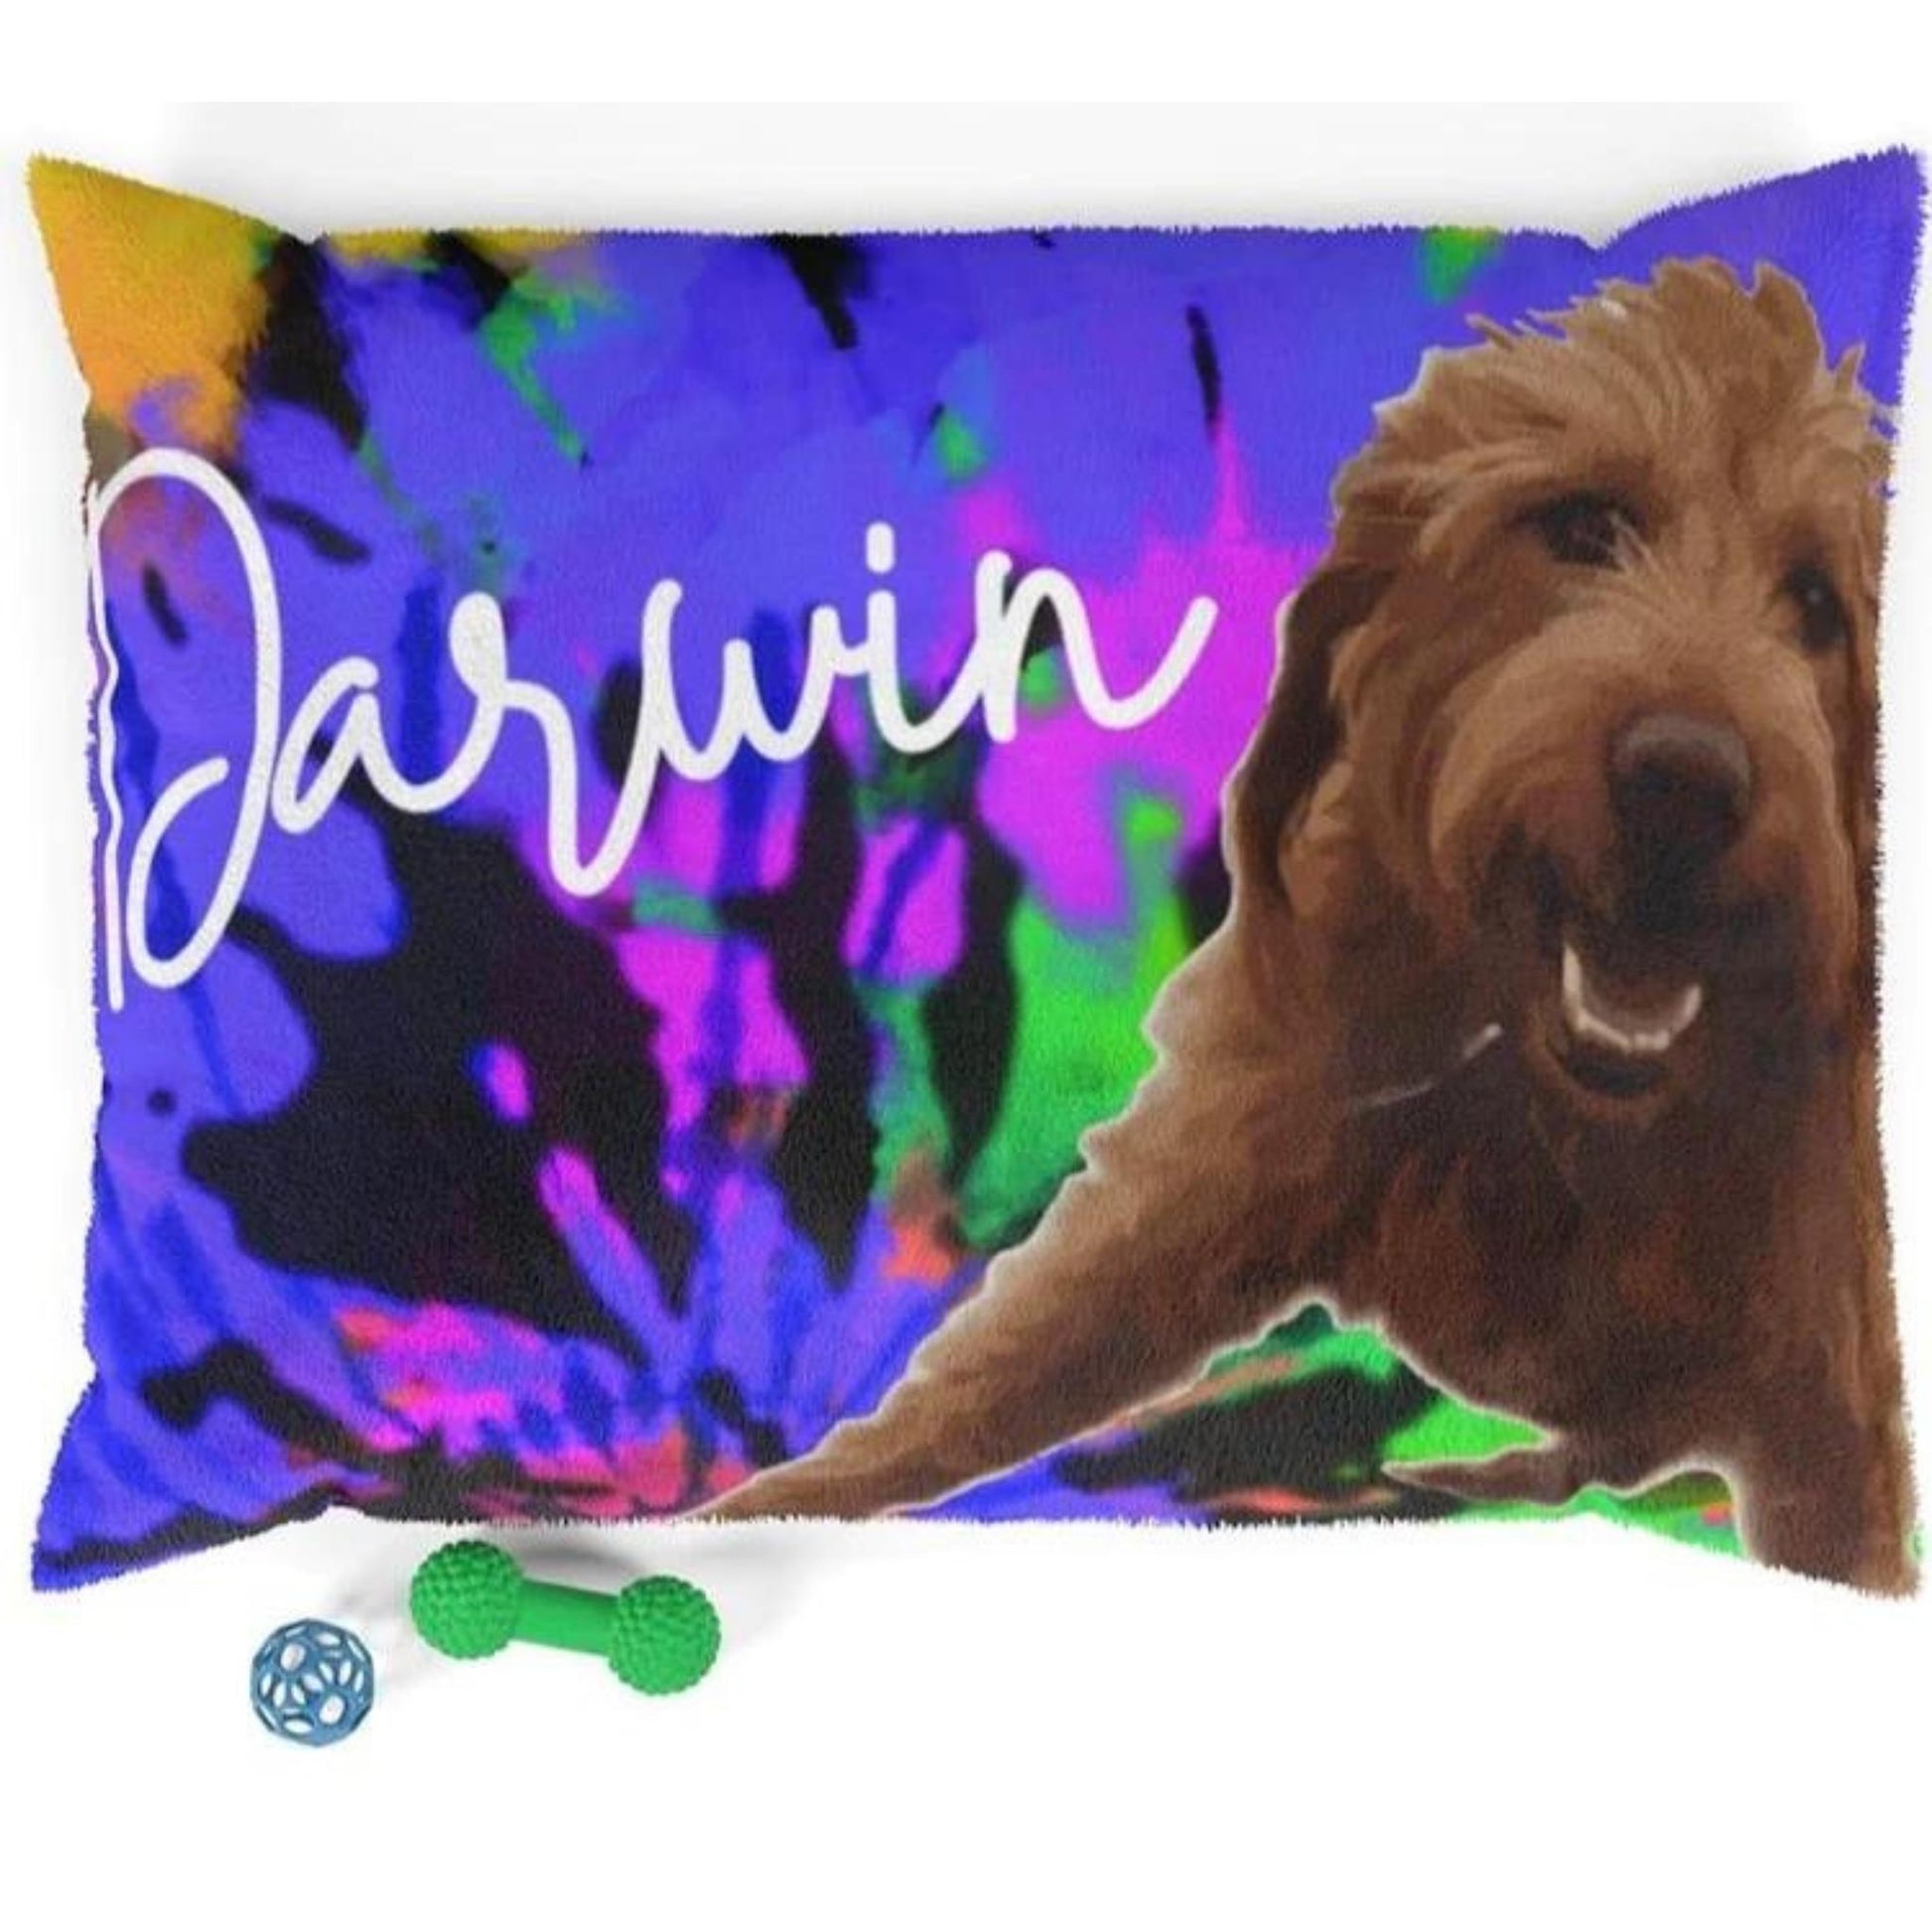 360 Creative Custom Dog Picture Pet Bed - a Spirit Animal - Pet Bed $60-$90 $90-$120 360 Creative